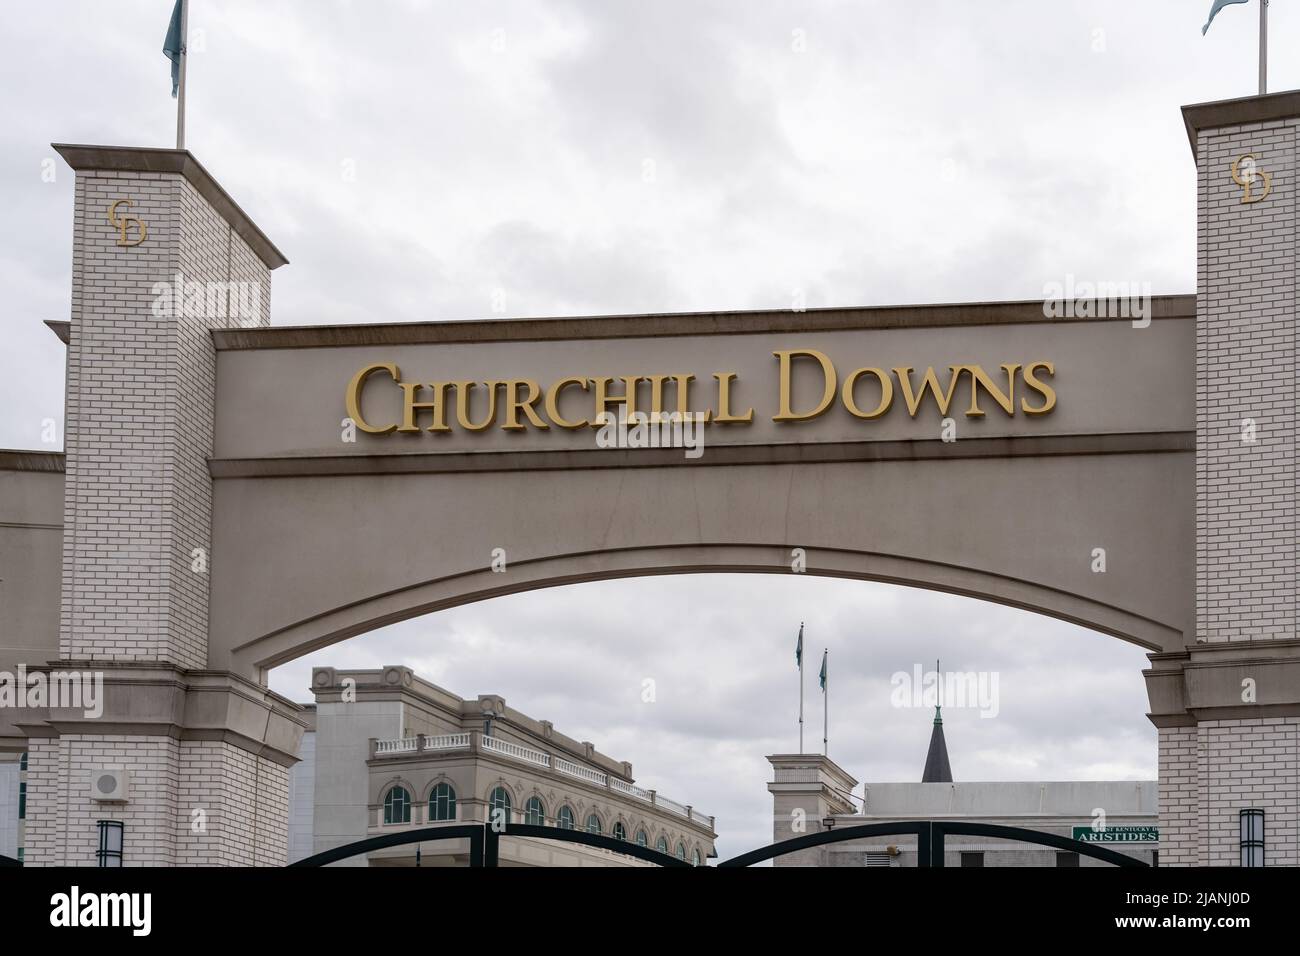 Louisville, KY, USA - December 28, 2021: Churchill Downs sign is shown in Louisville, KY, USA. Stock Photo